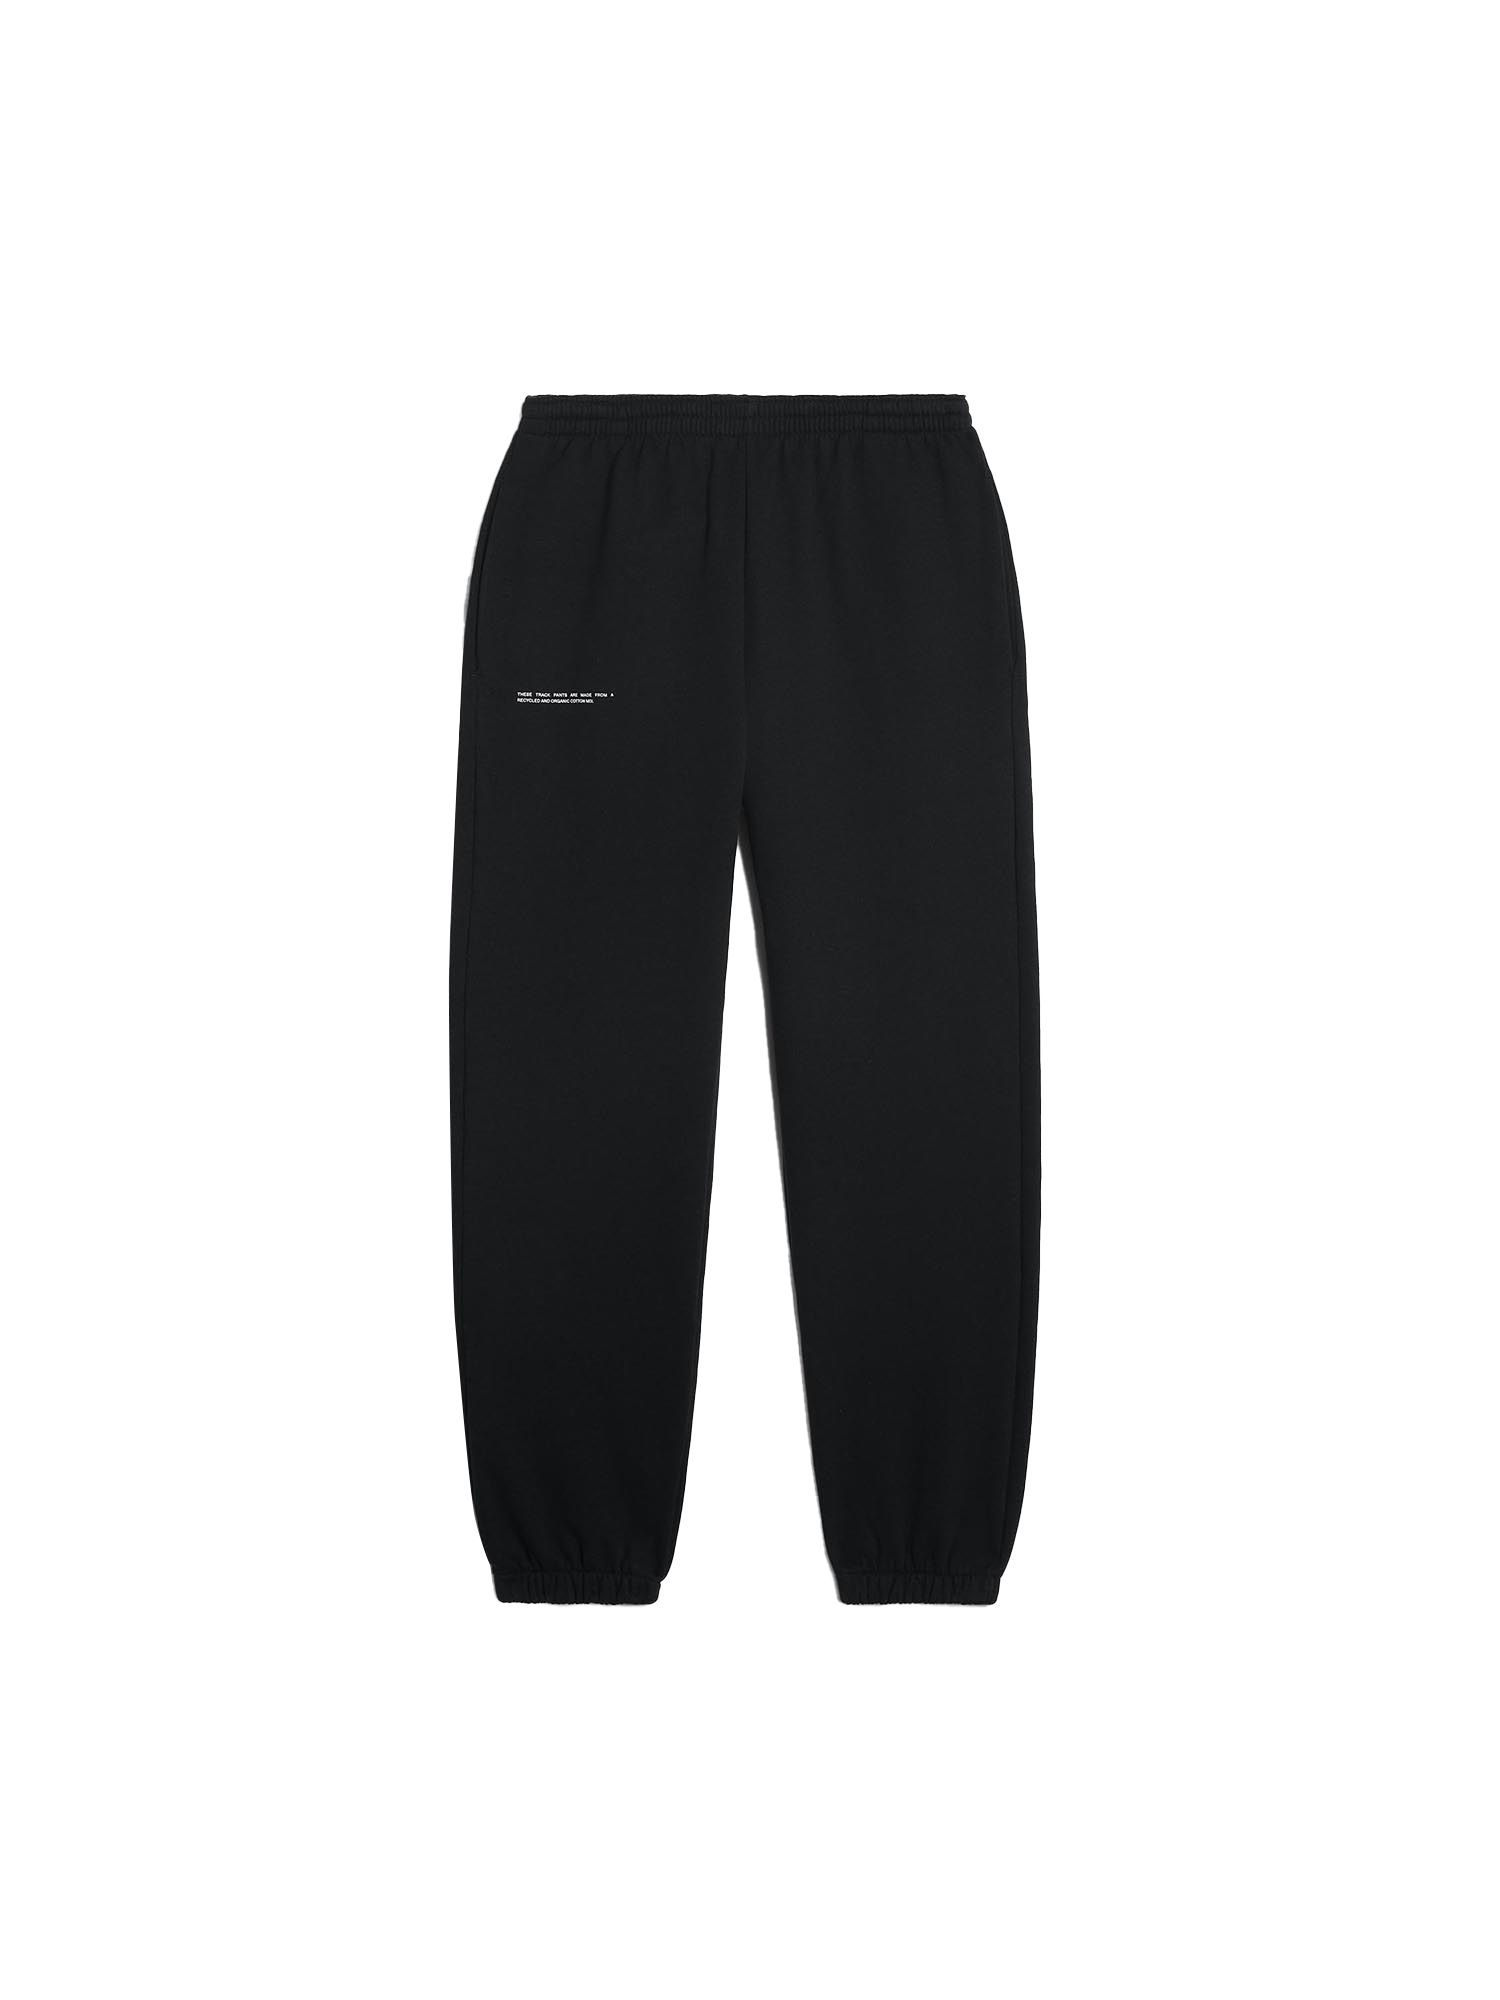 Wasted Youth Heavyweight Sweatpants - www.istore.al